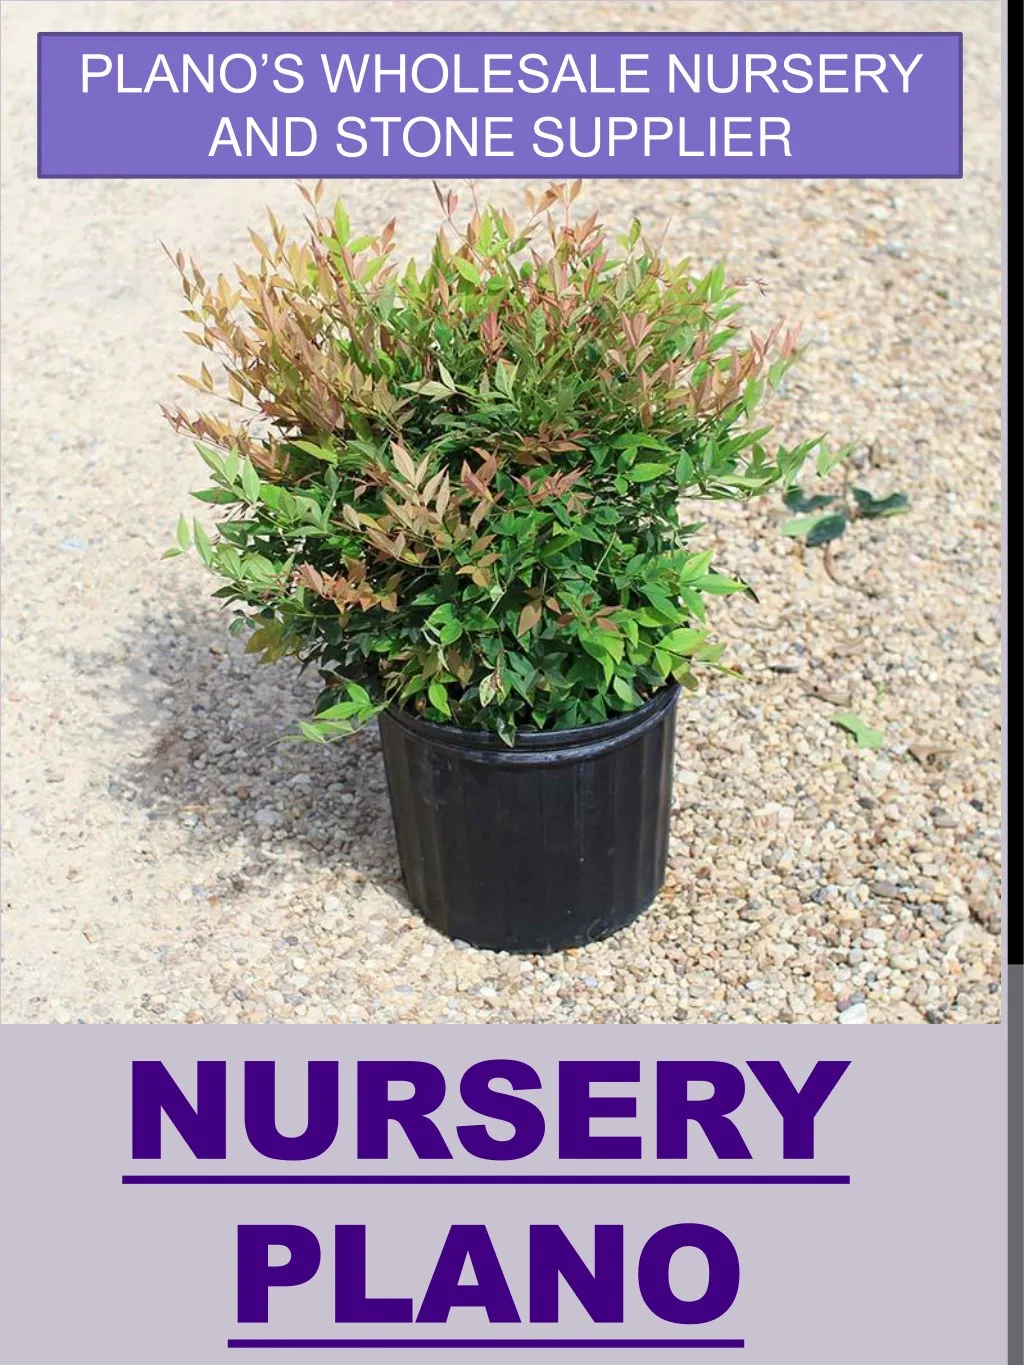 plano s wholesale nursery and stone supplier